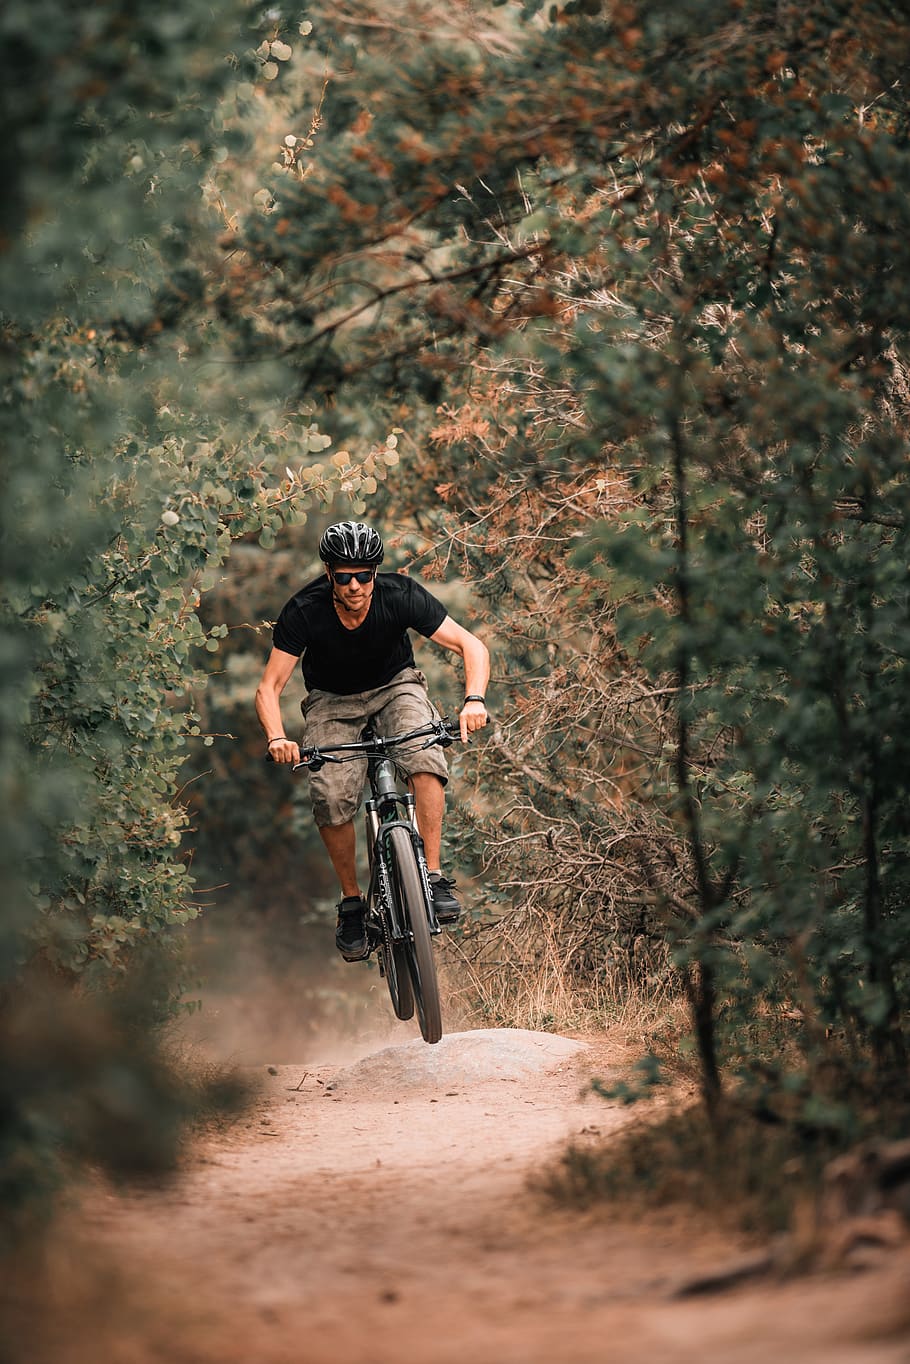 Person Riding A Bicycle, adventure, cyclist, forest, fun, man